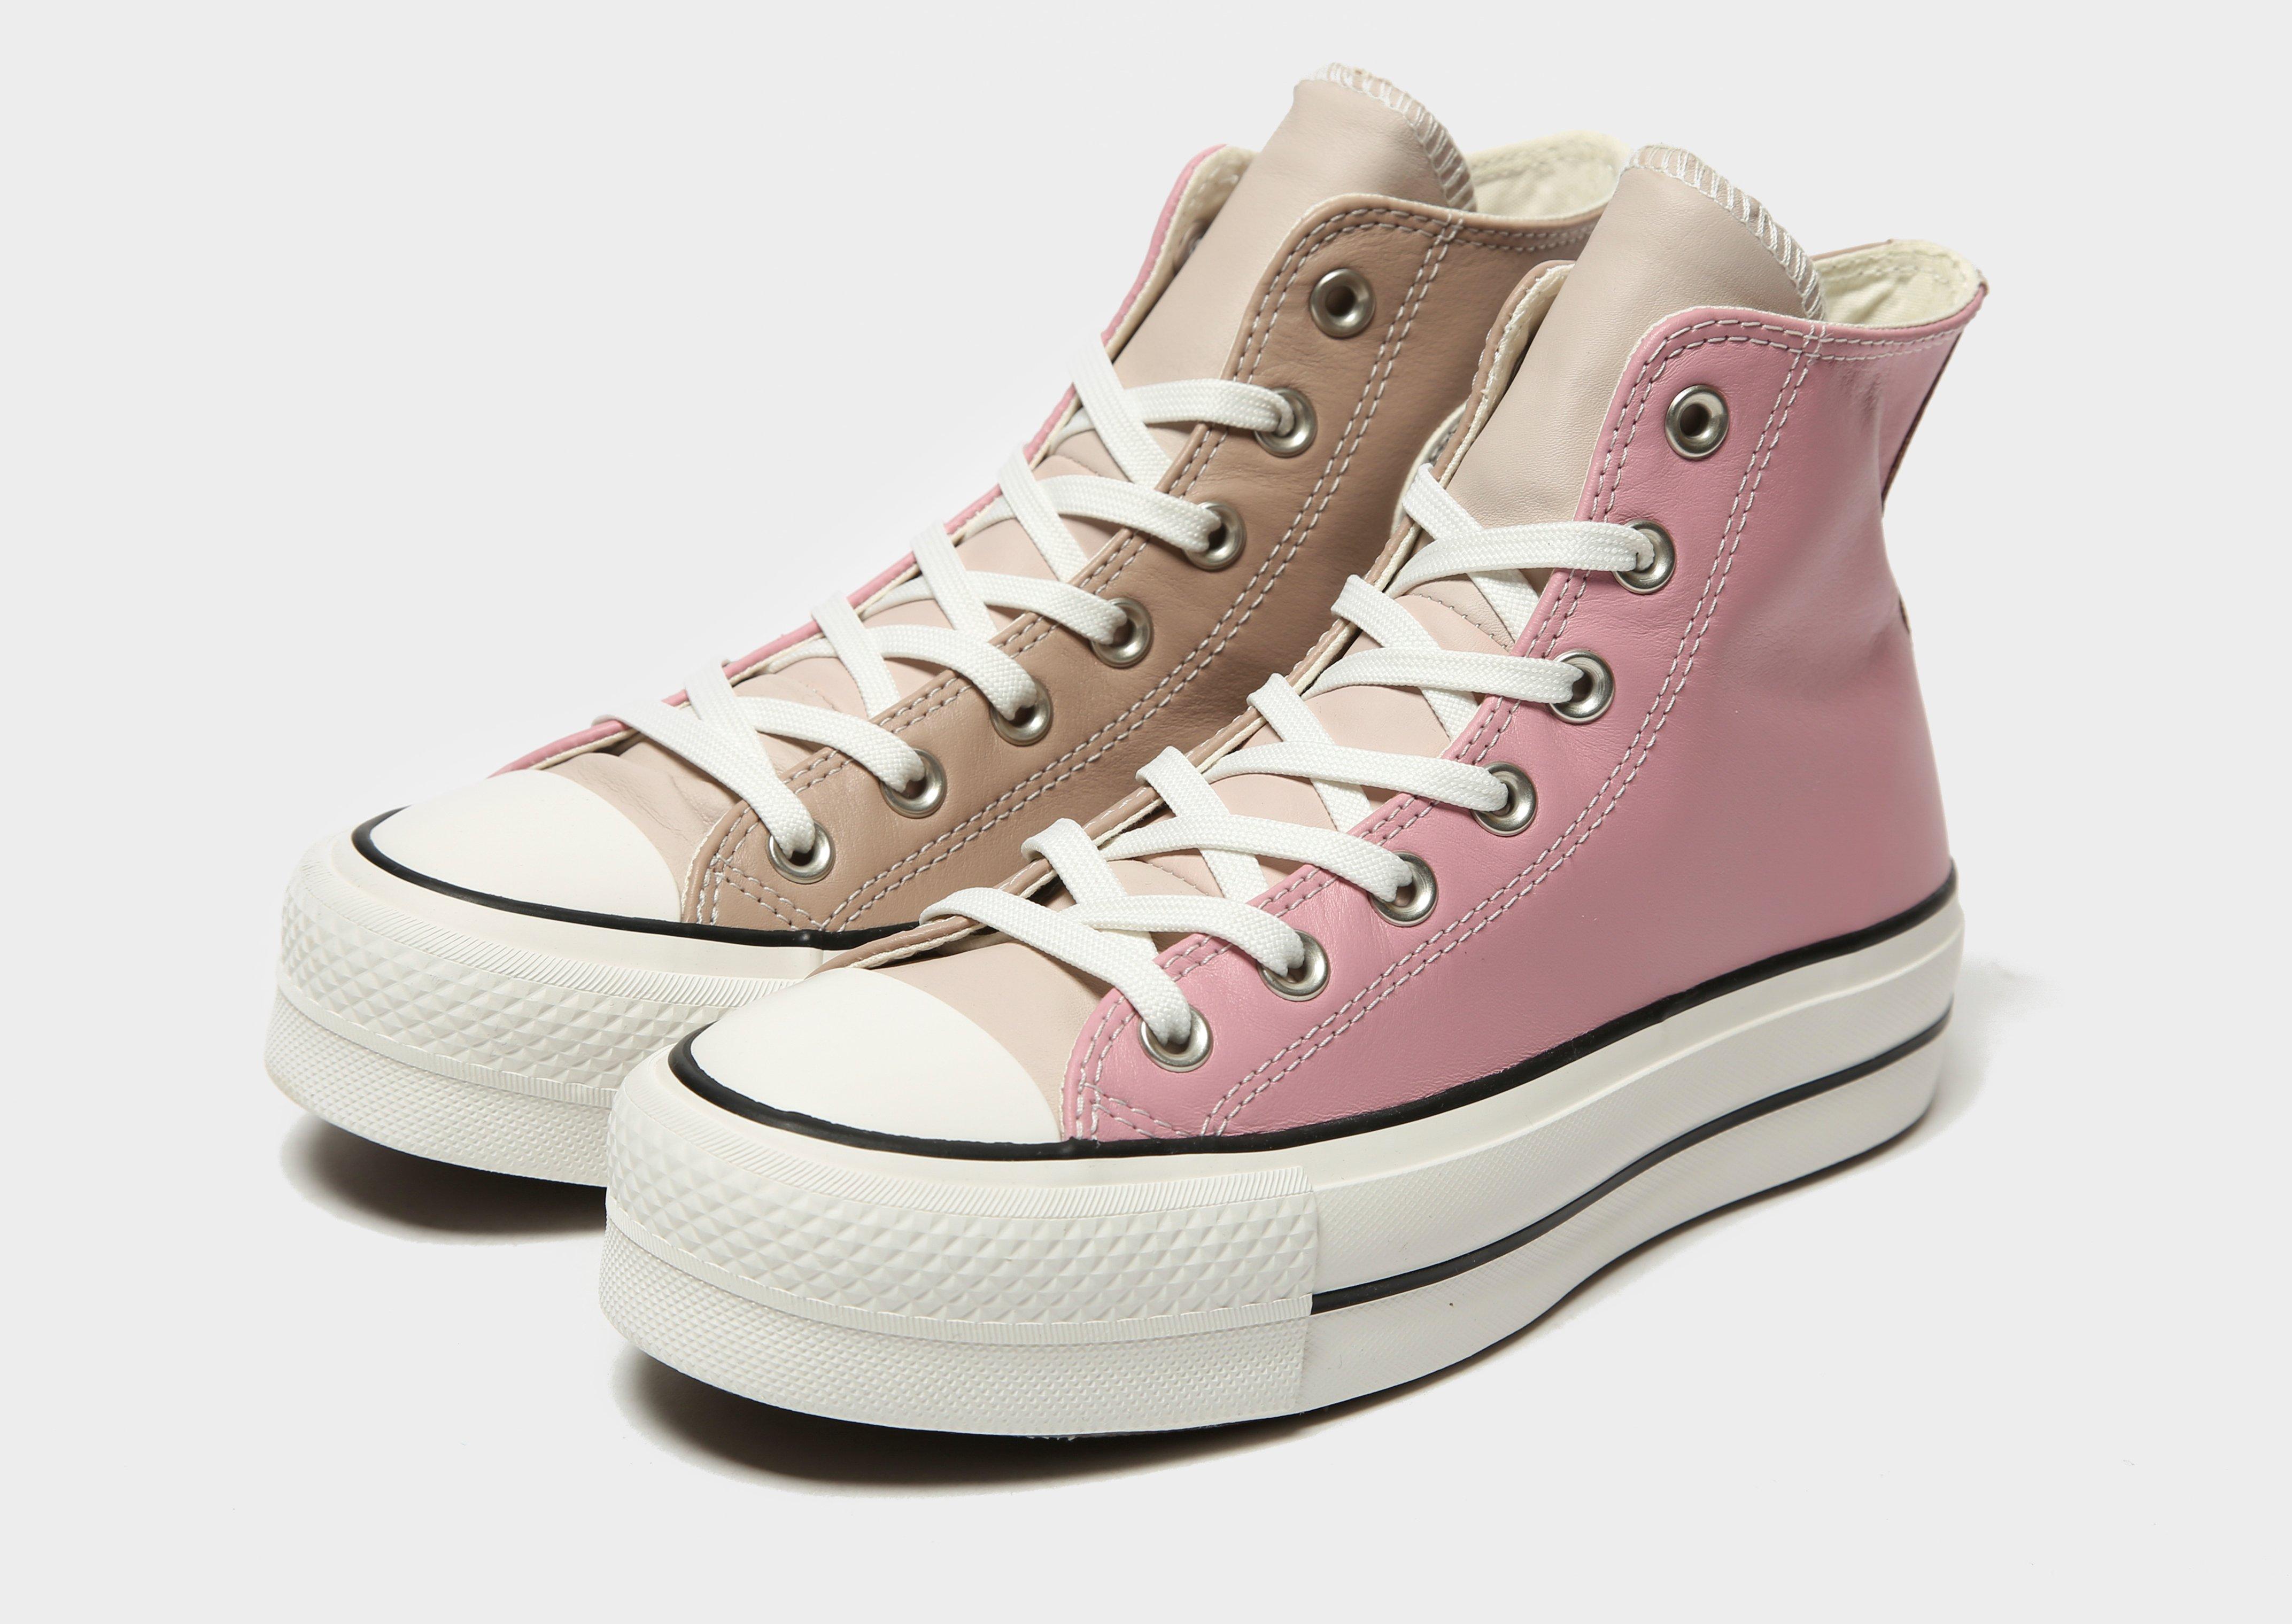 converse all star hi leather women's